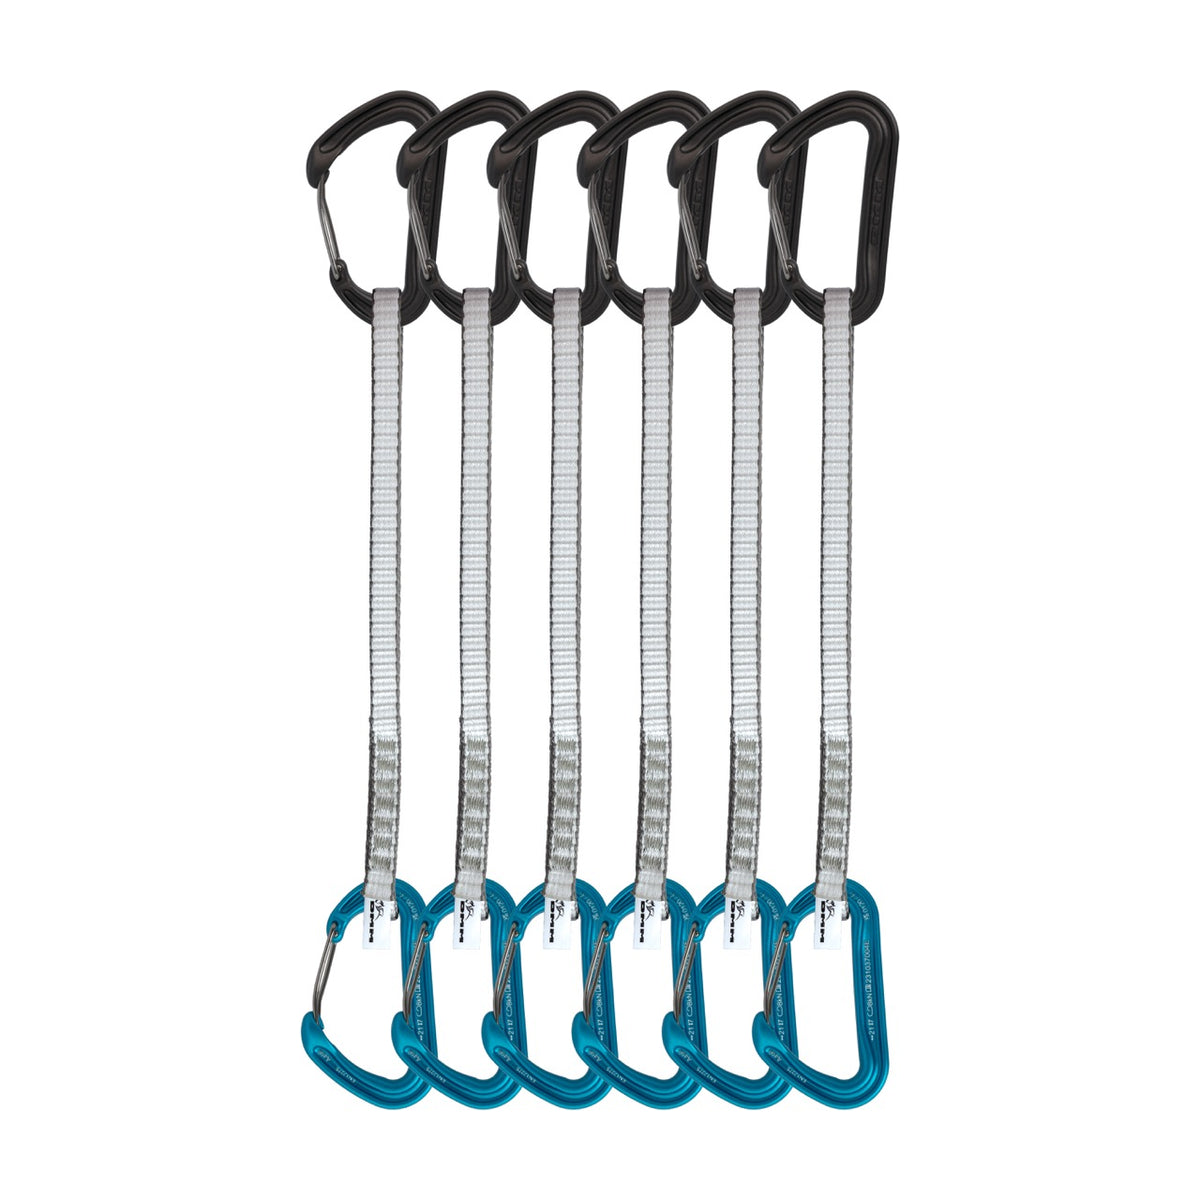 DMM Aether Quickdraw 25cm 6-Pack